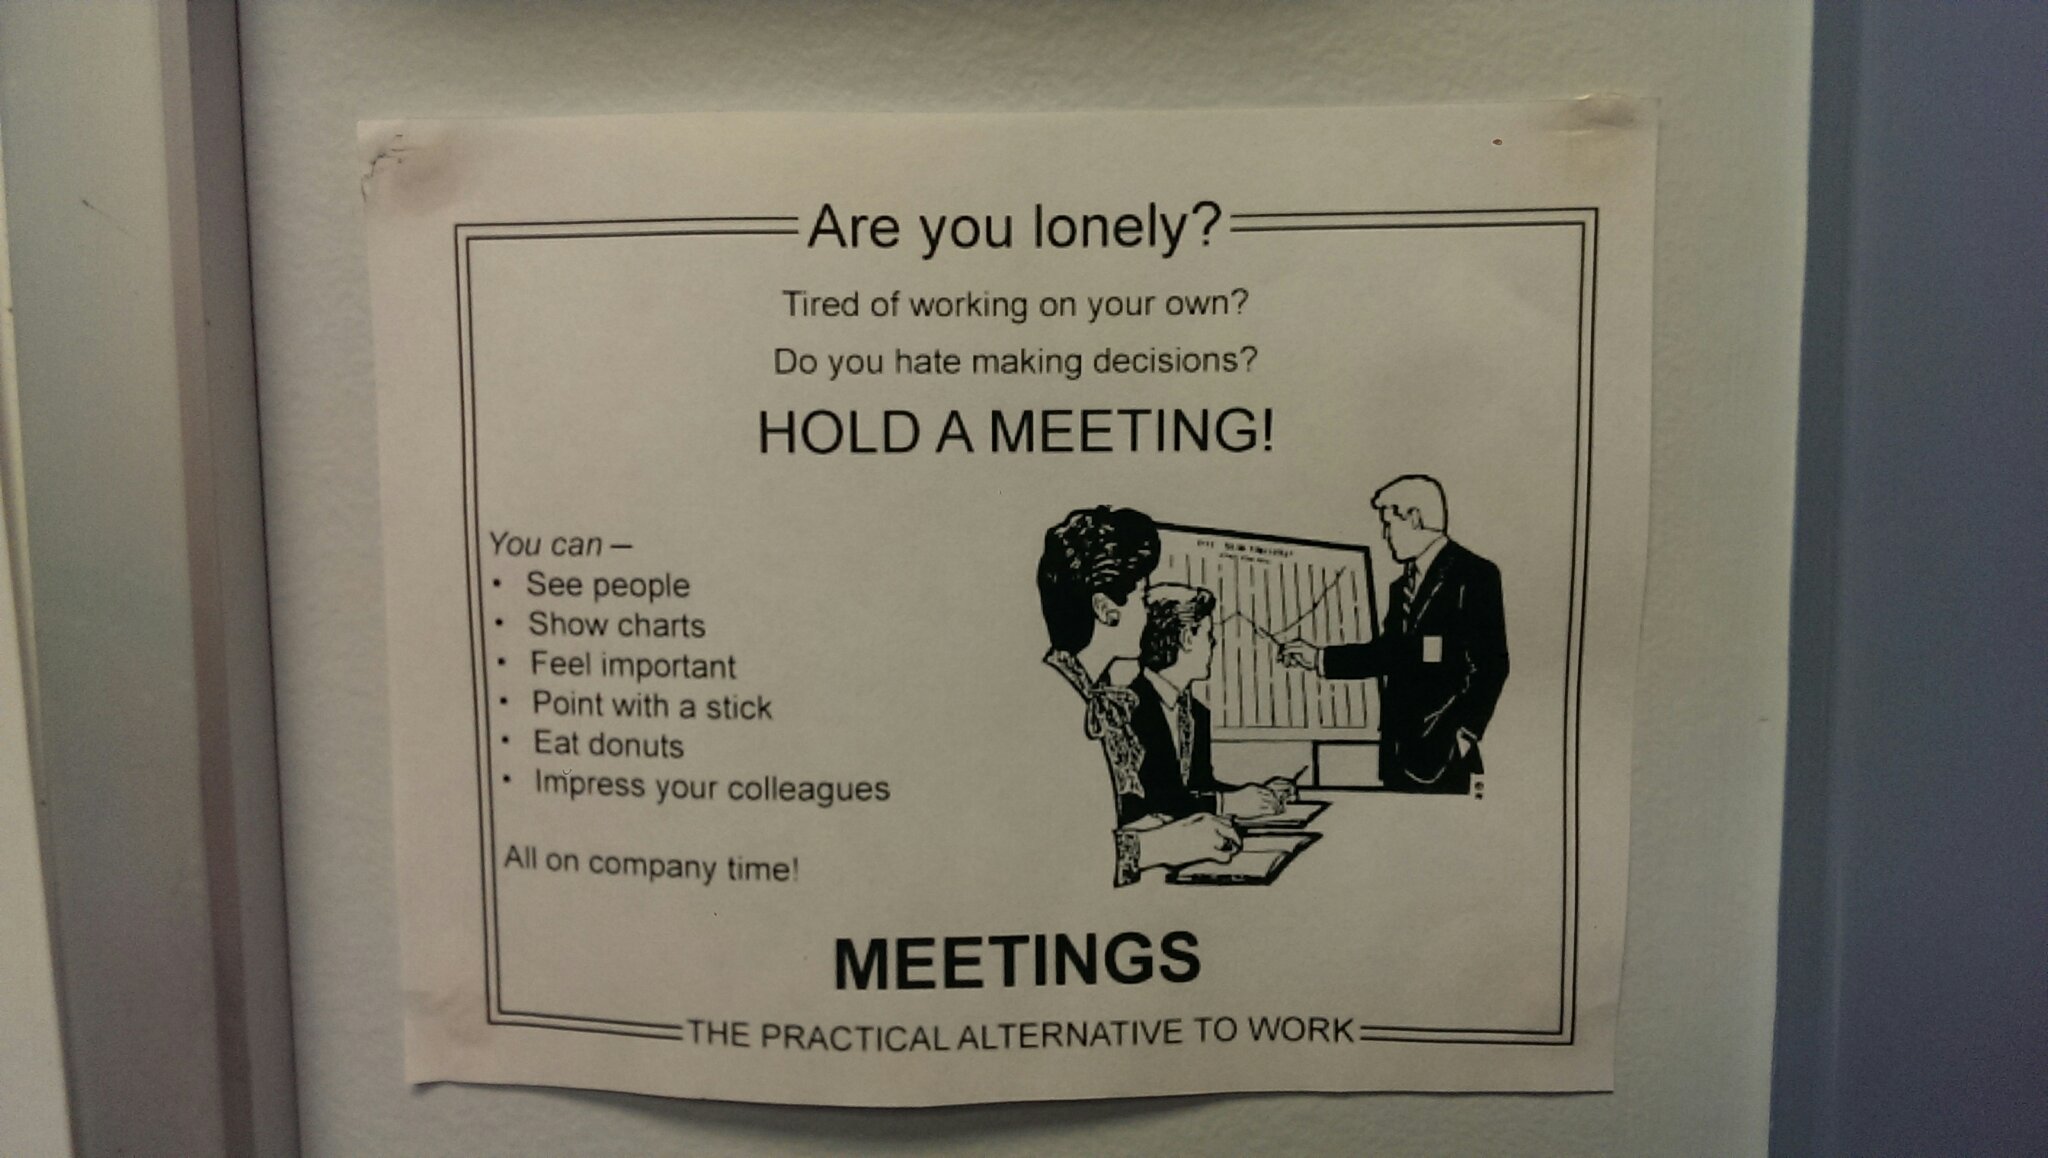 Saw this at my dad's work - meme